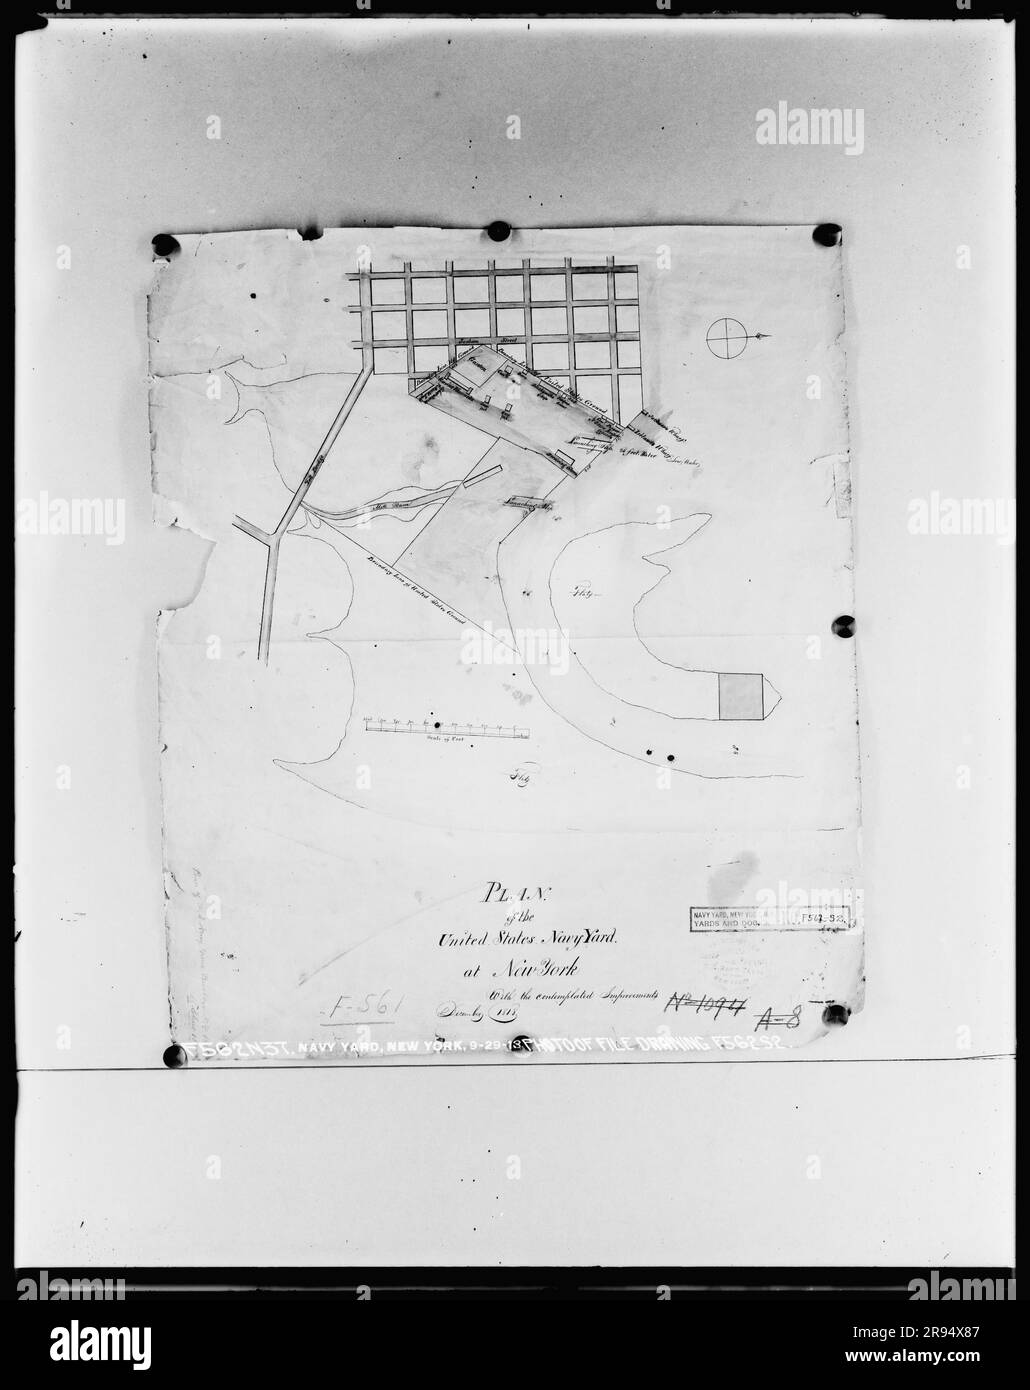 Photo of File Drawing F562S2. Glass Plate Negatives of the Construction and Repair of Buildings, Facilities, and Vessels at the New York Navy Yard. Stock Photo